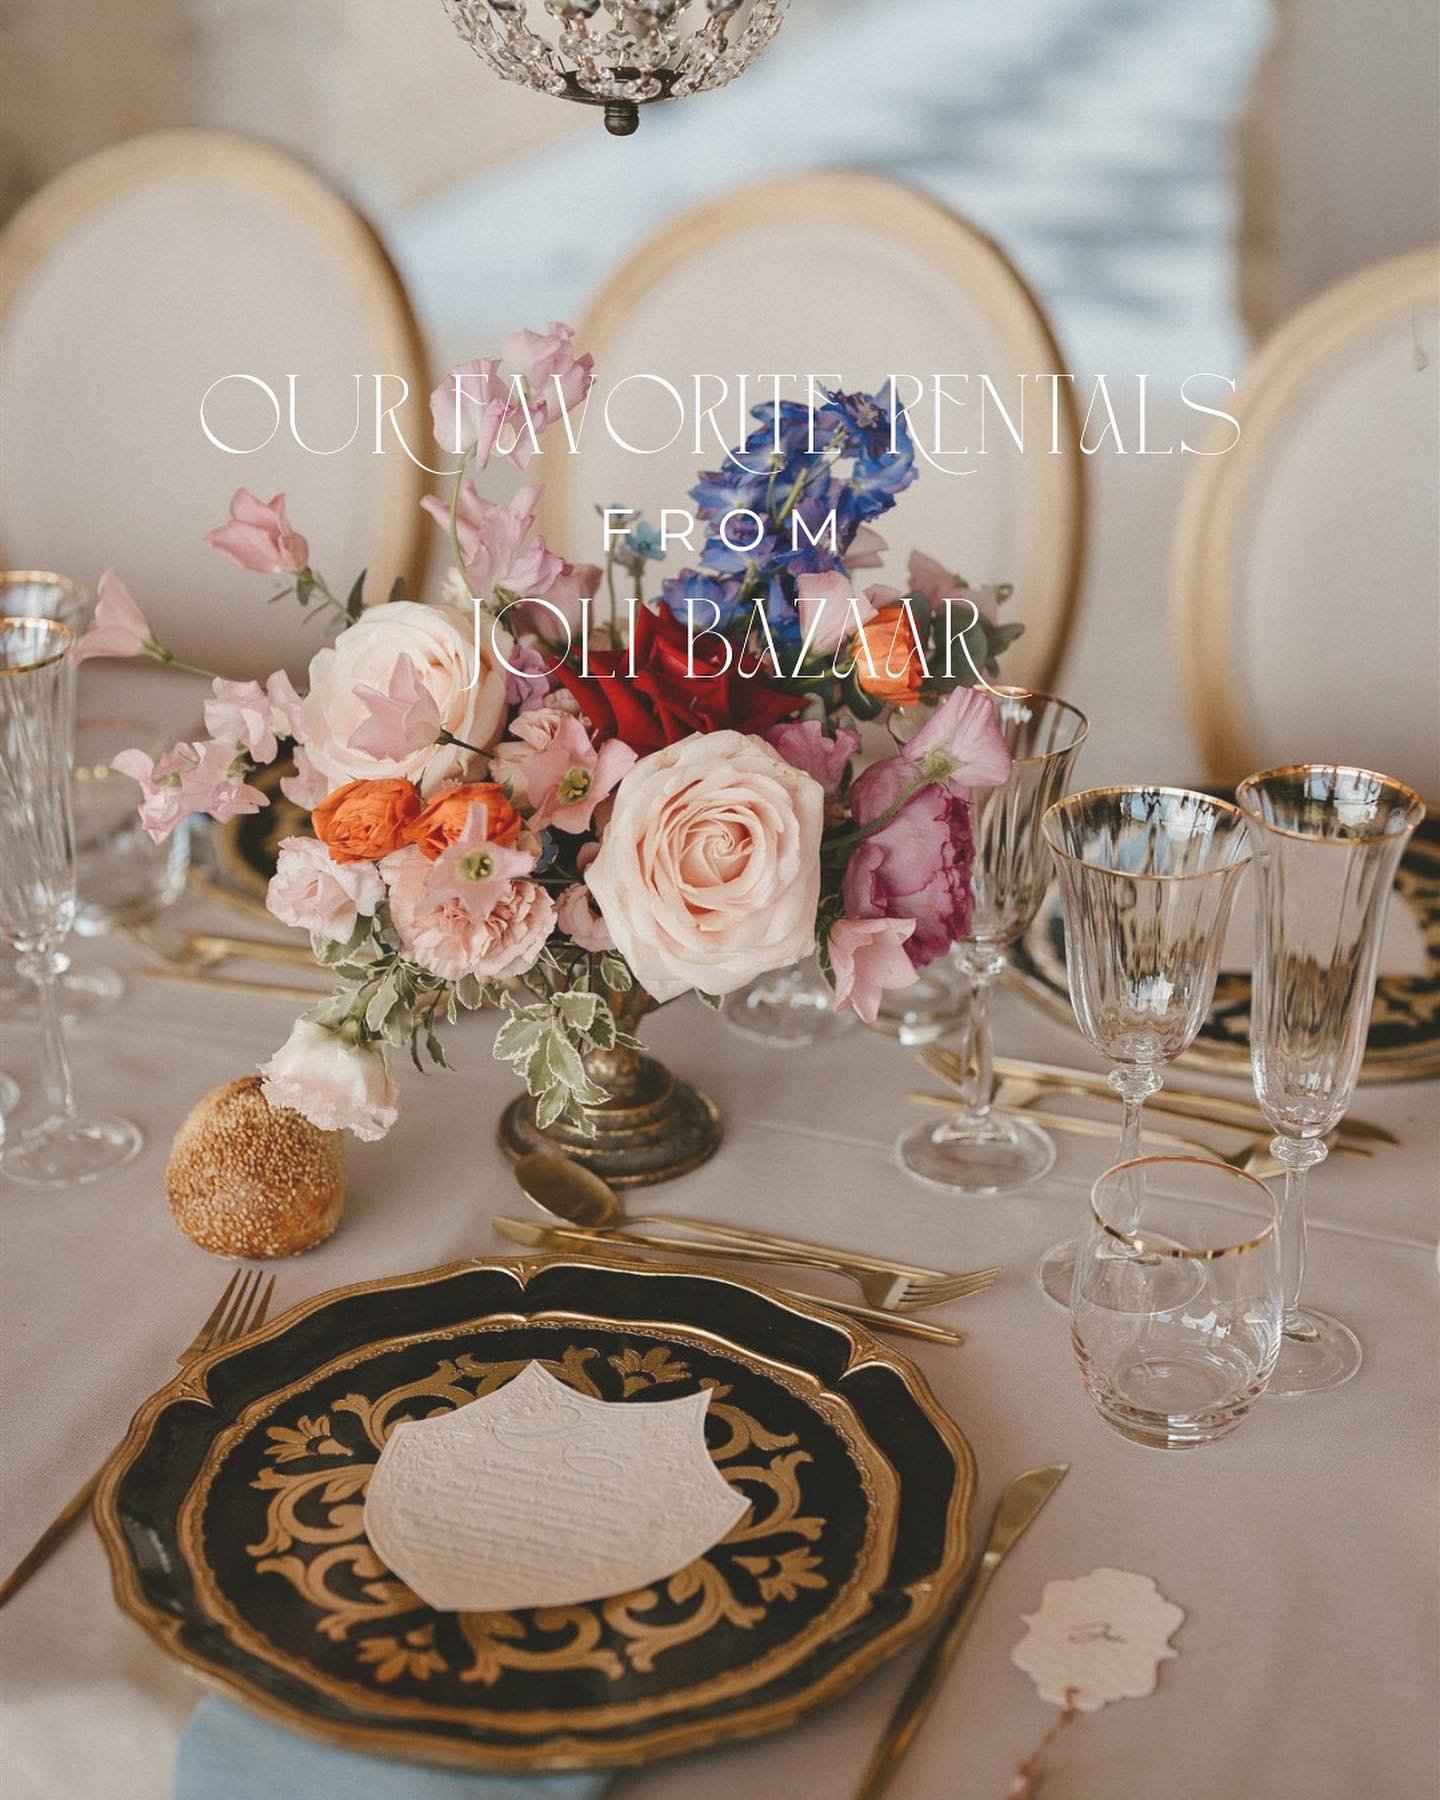 Our weddings always have a special something, and that usually comes down to our event design service. This is especially true when it comes to selecting the perfect pieces of furniture and decor to bring our couples&lsquo; visions to life.

Today, w